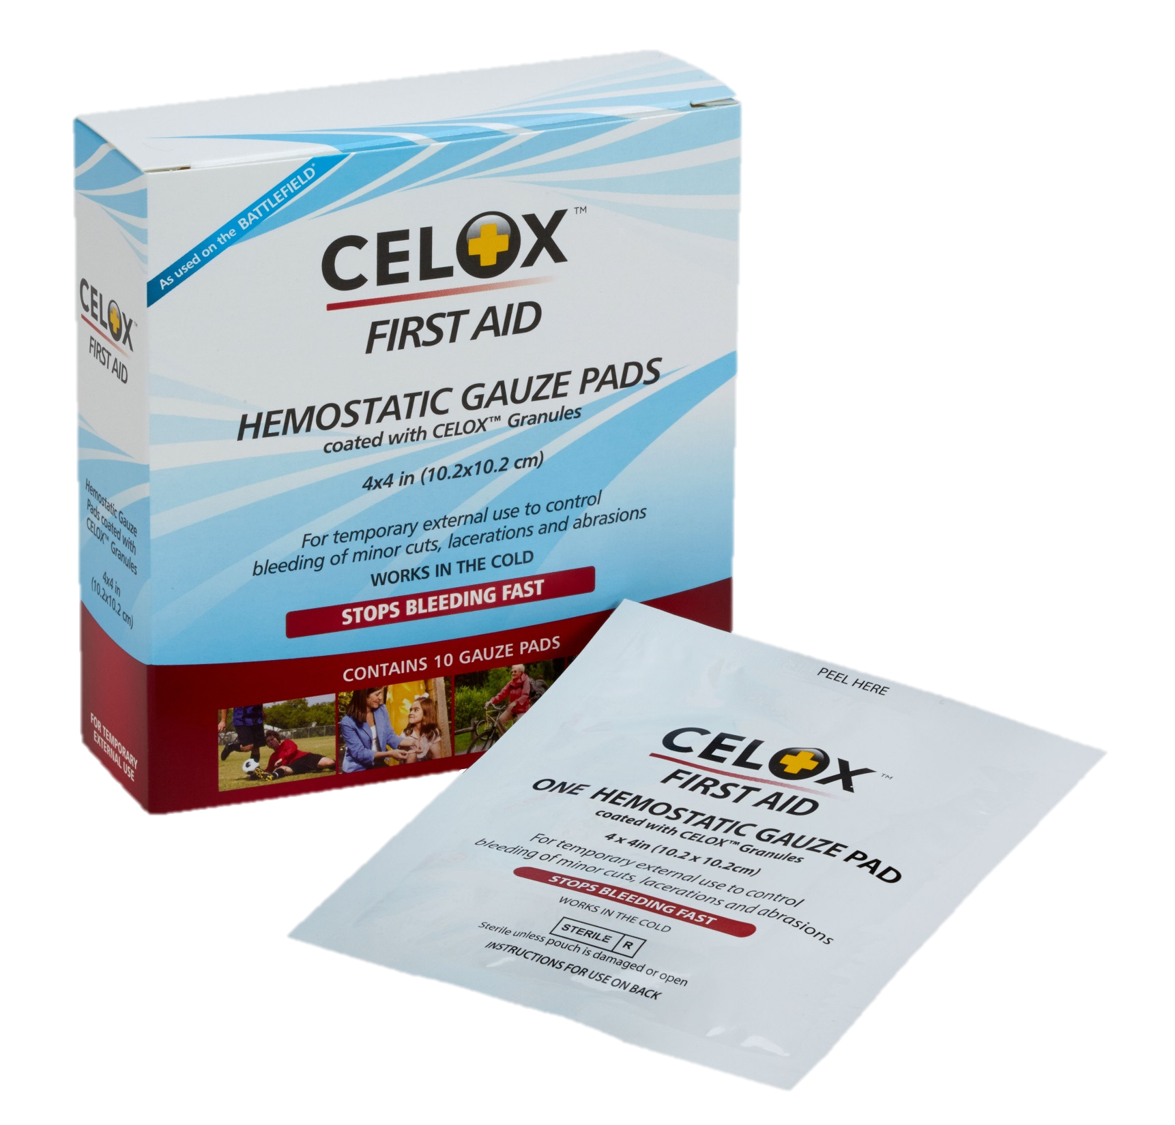 Celox for Workplace and Remote Medicine